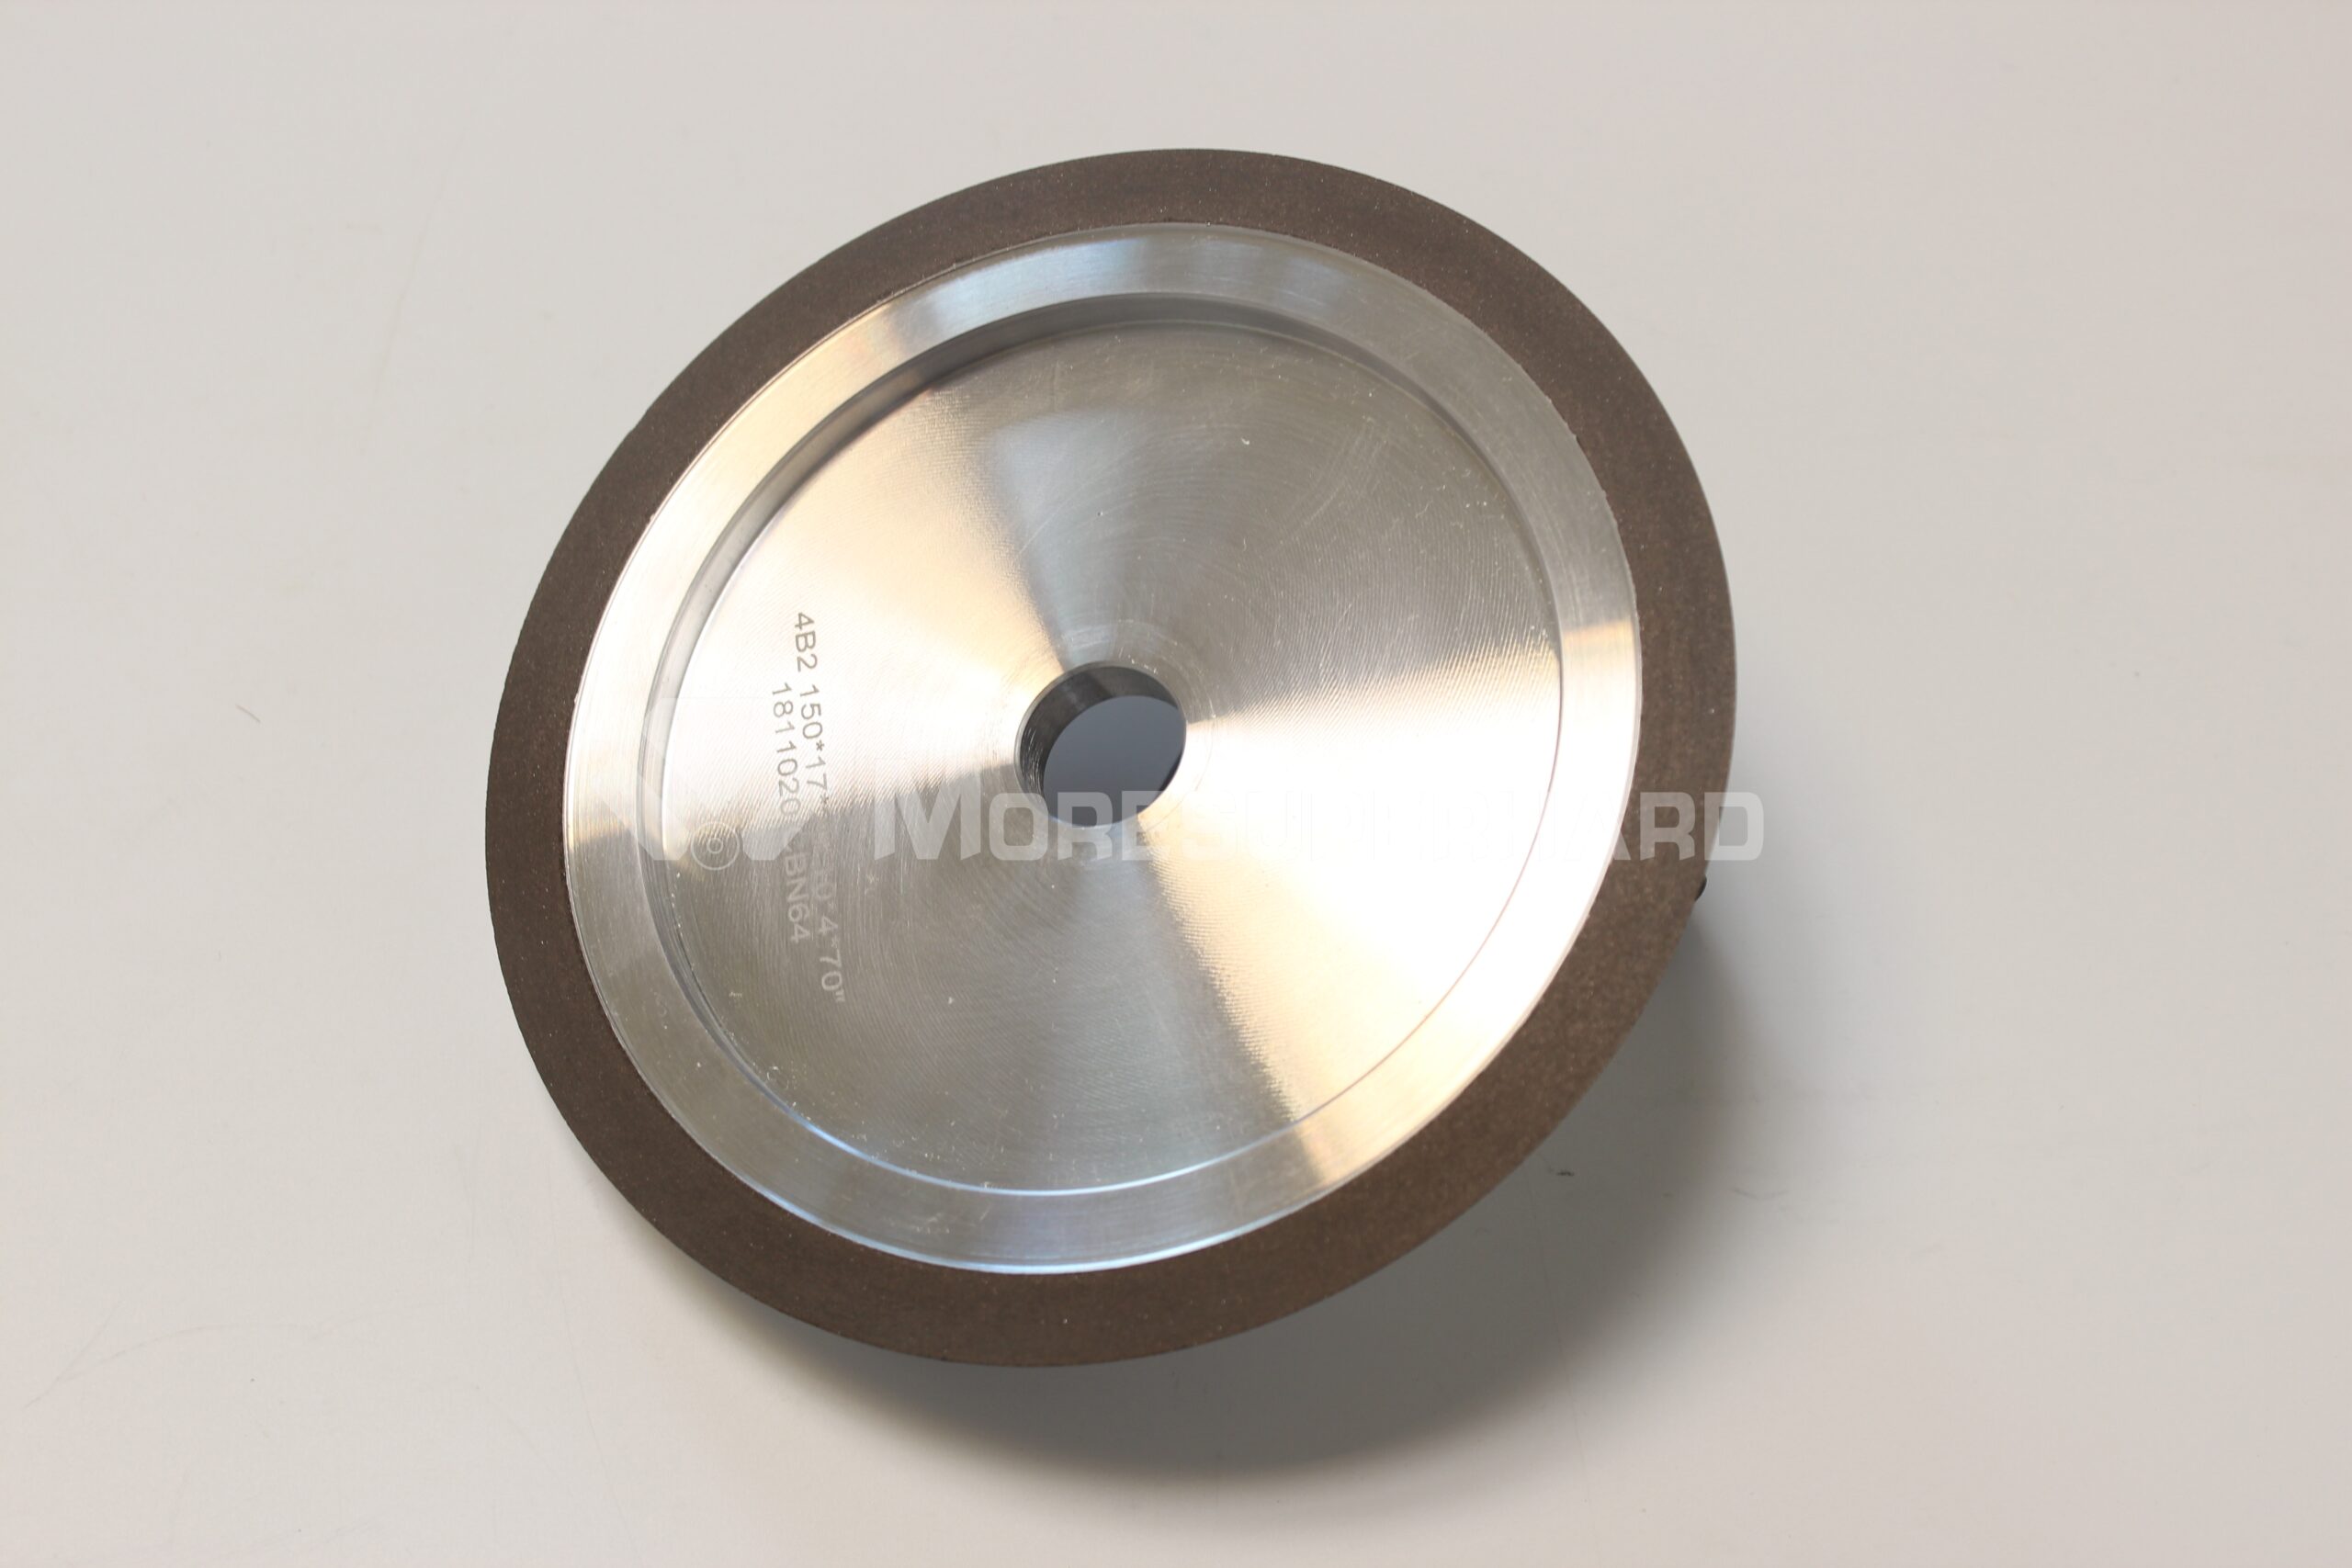 Resin CBN Wheels for Woodworking Tool Grinding